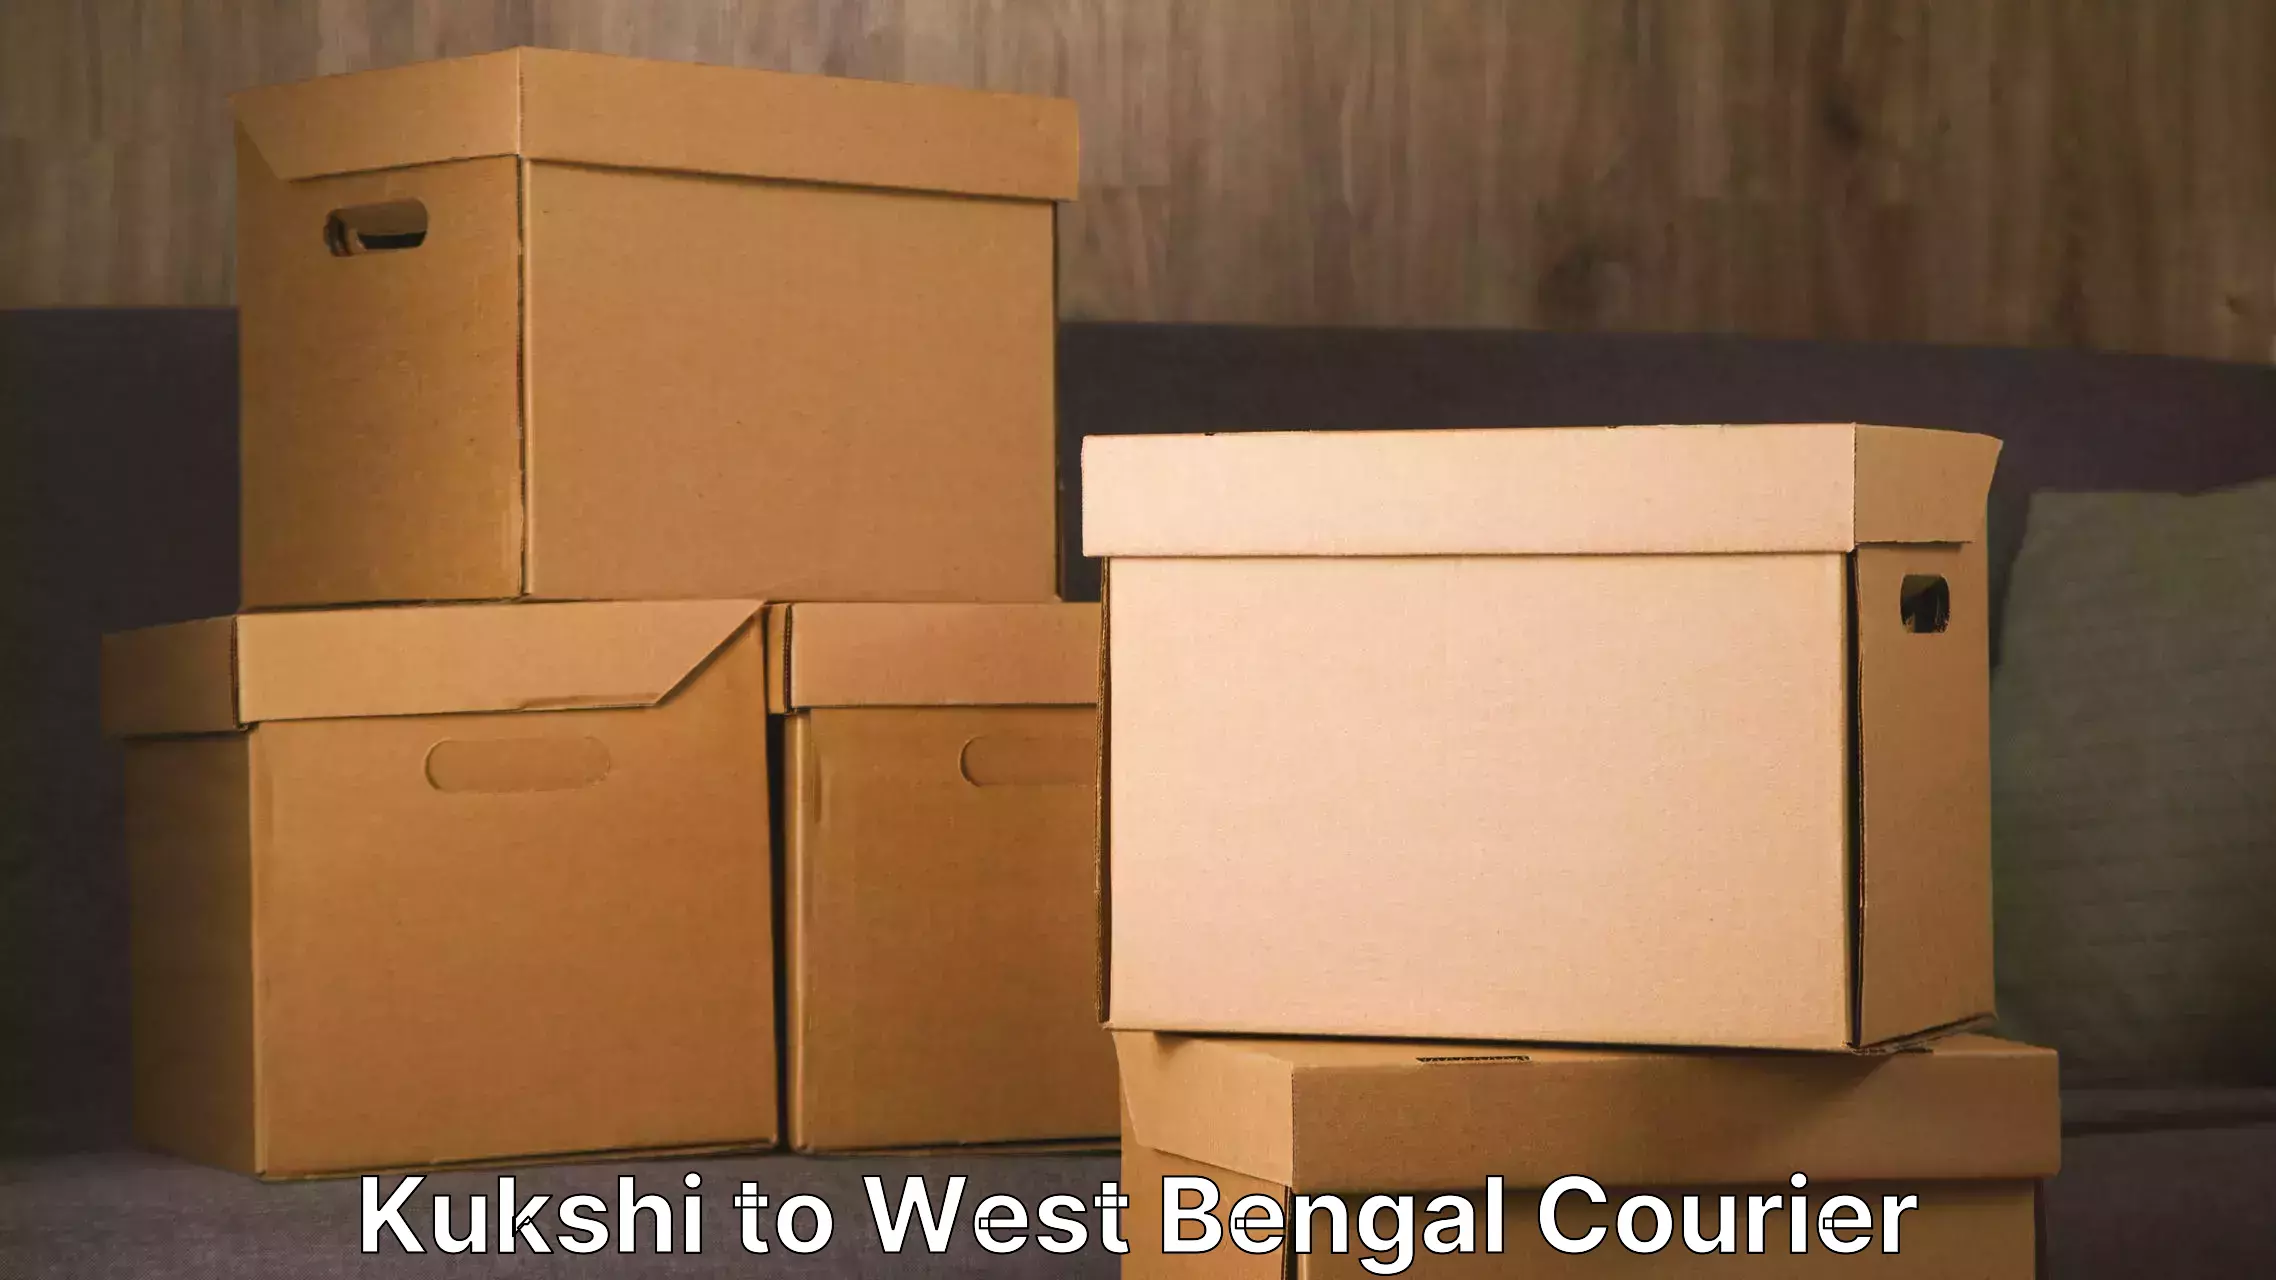 Furniture transport experts Kukshi to West Bengal